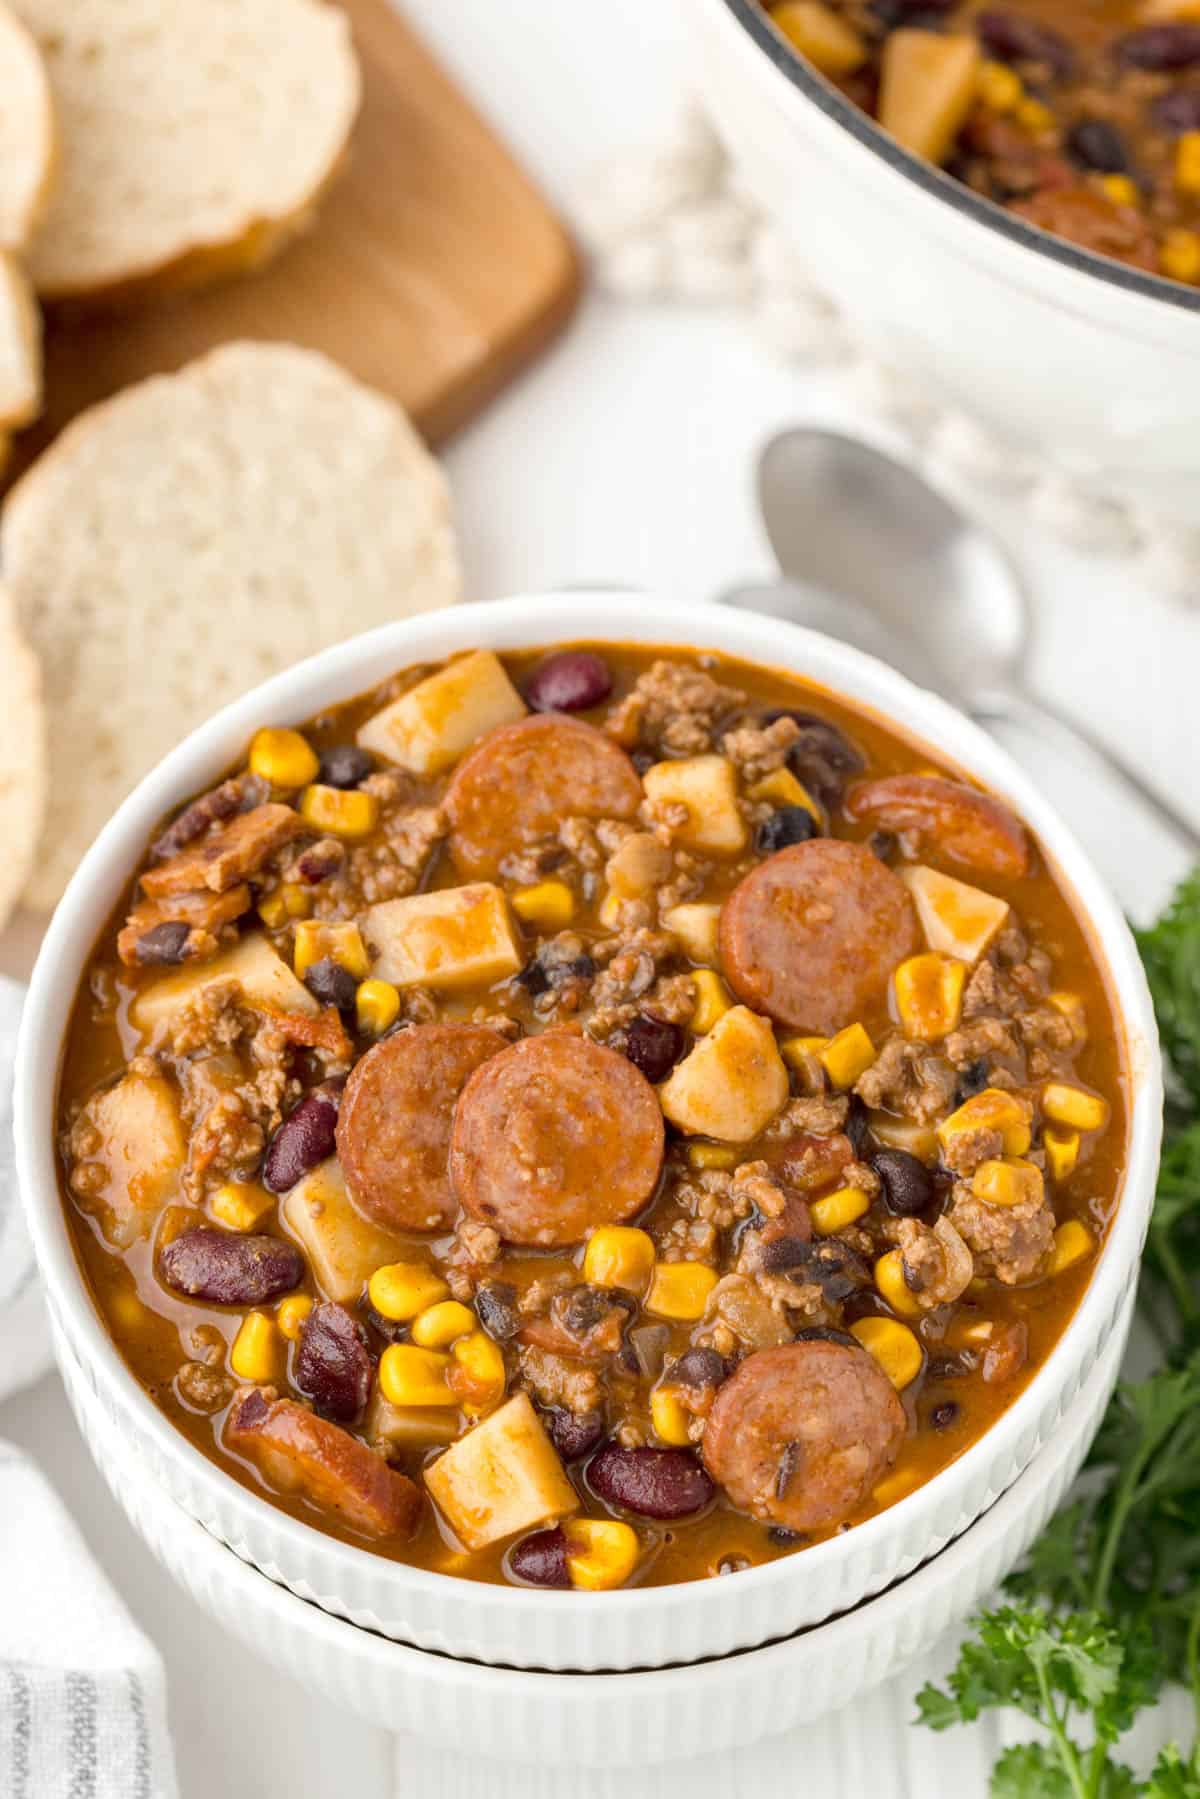 A bowl of thick cowboy stew with sliced bread in the back.